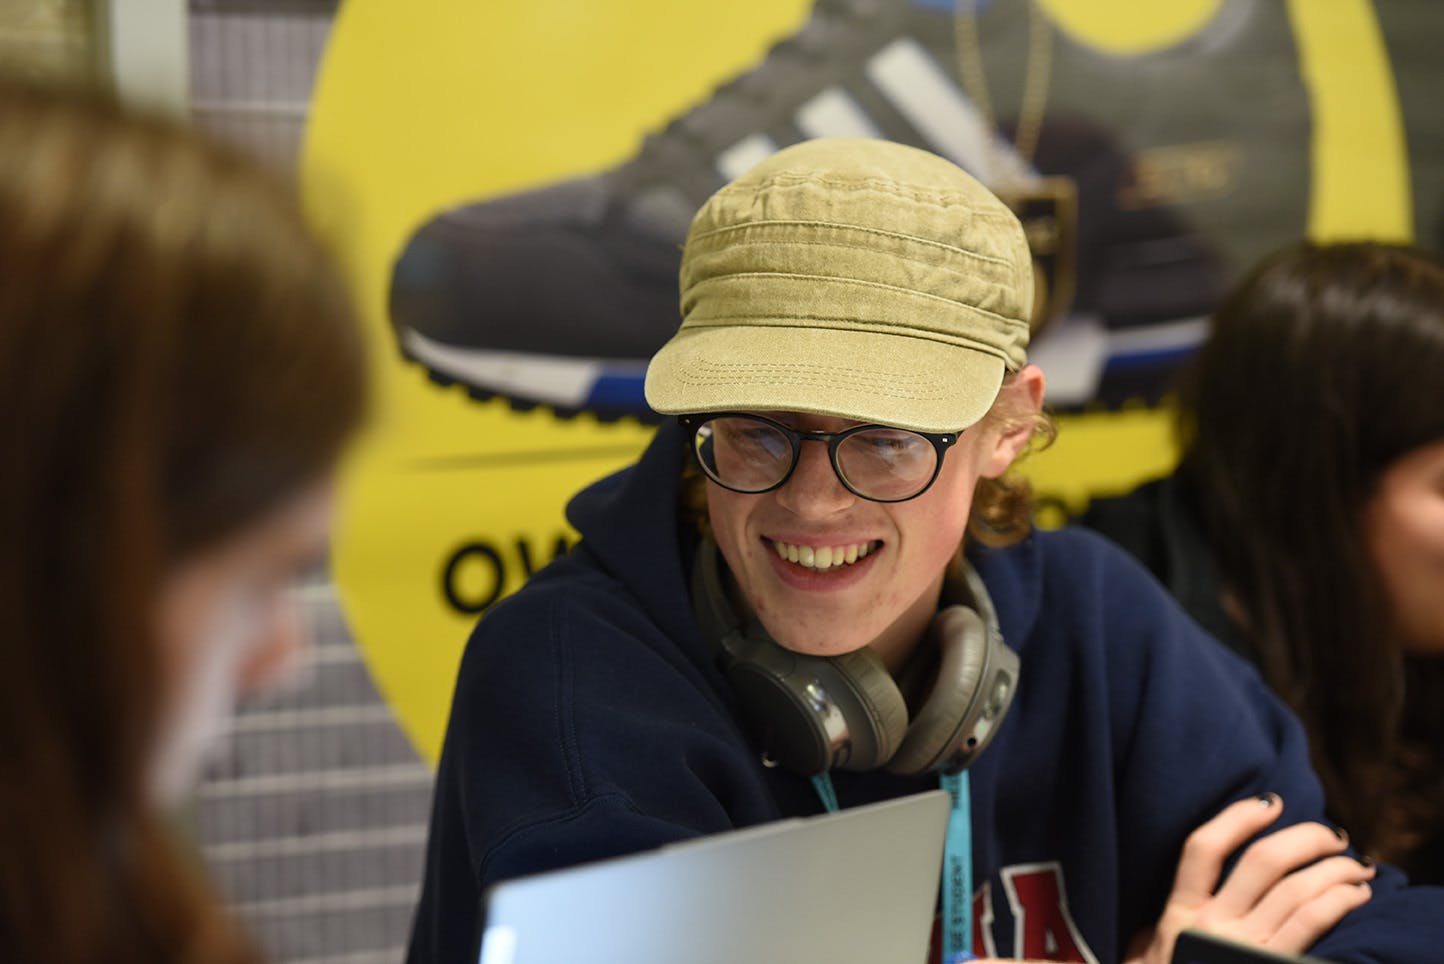 Student wearing hat and headphones